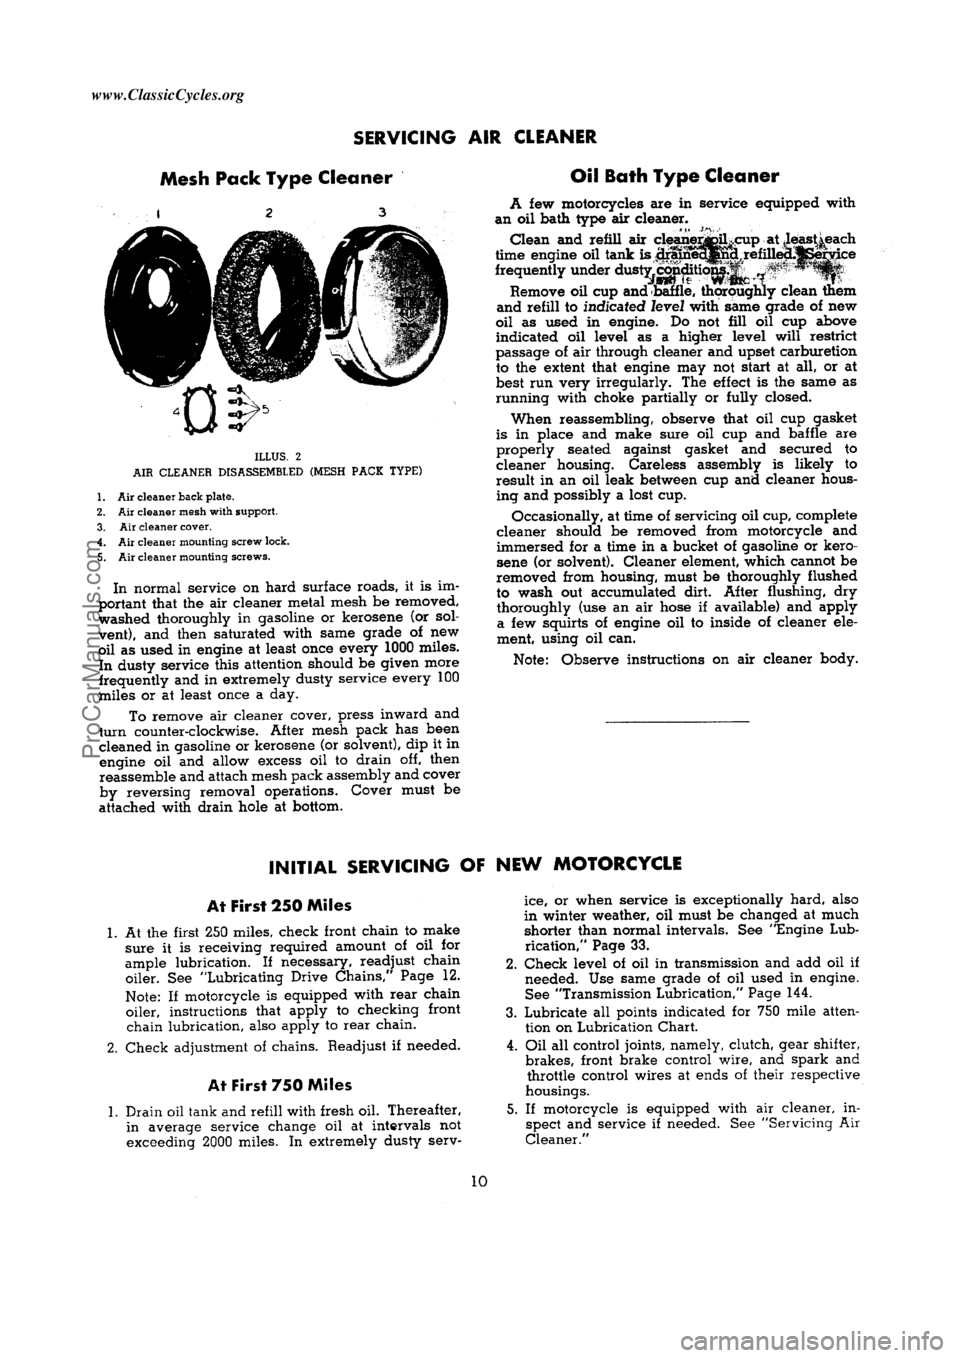 HARLEY-DAVIDSON KNUCKLEHEAD 1940  Service Manual  [10]ProCarManuals.com     www.ClassicCycles.org  